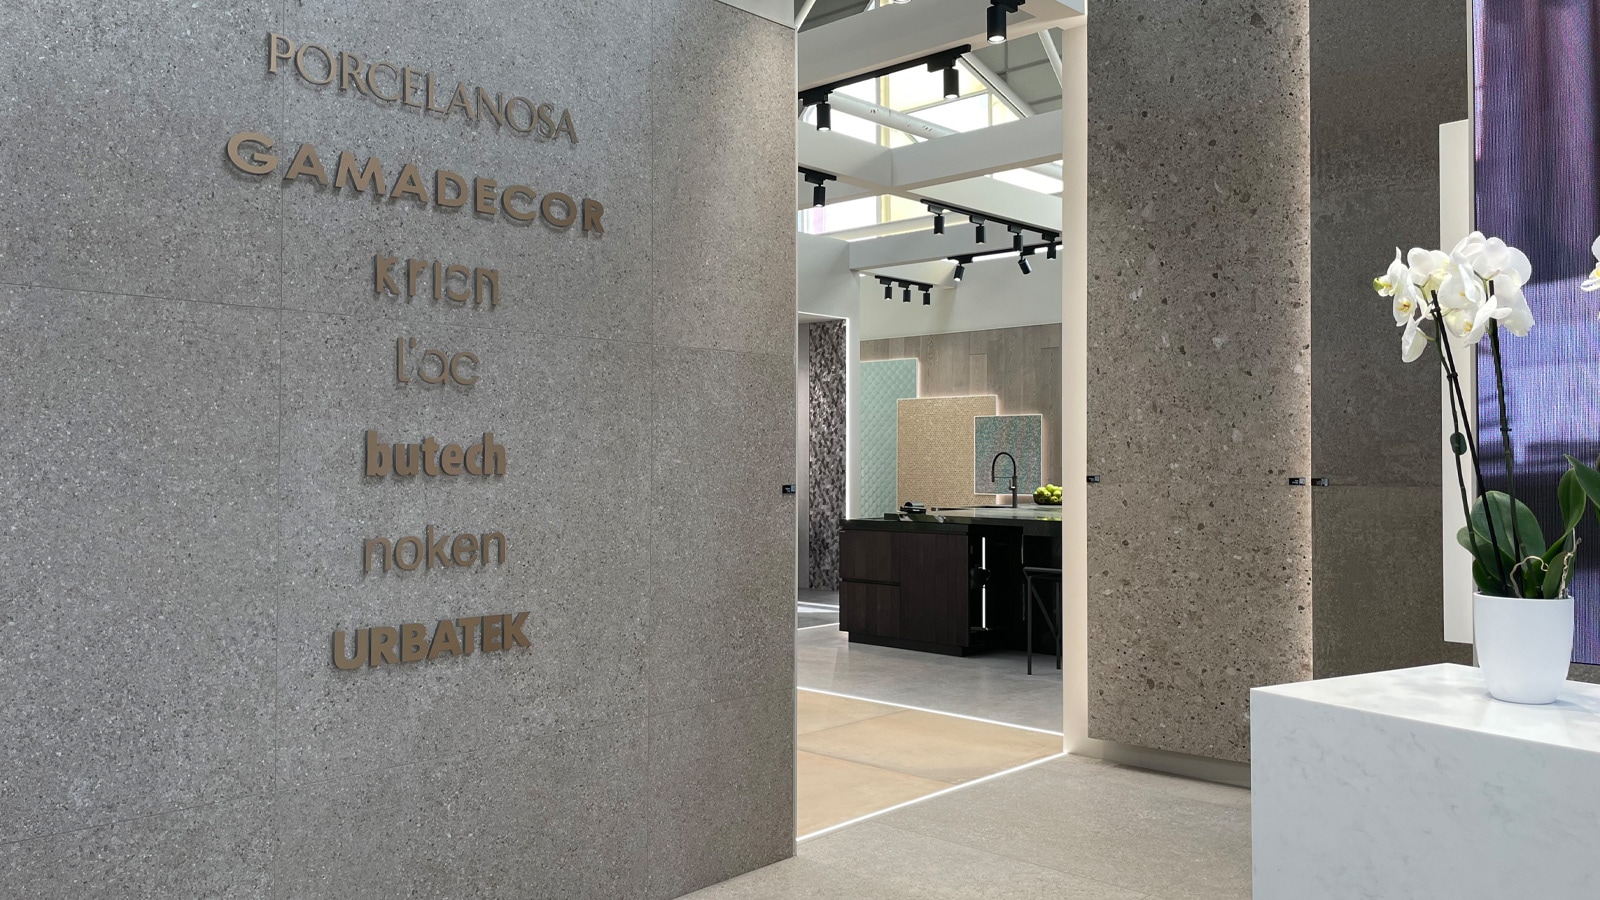 New collections from PORCELANOSA on show at Cersaie 2021